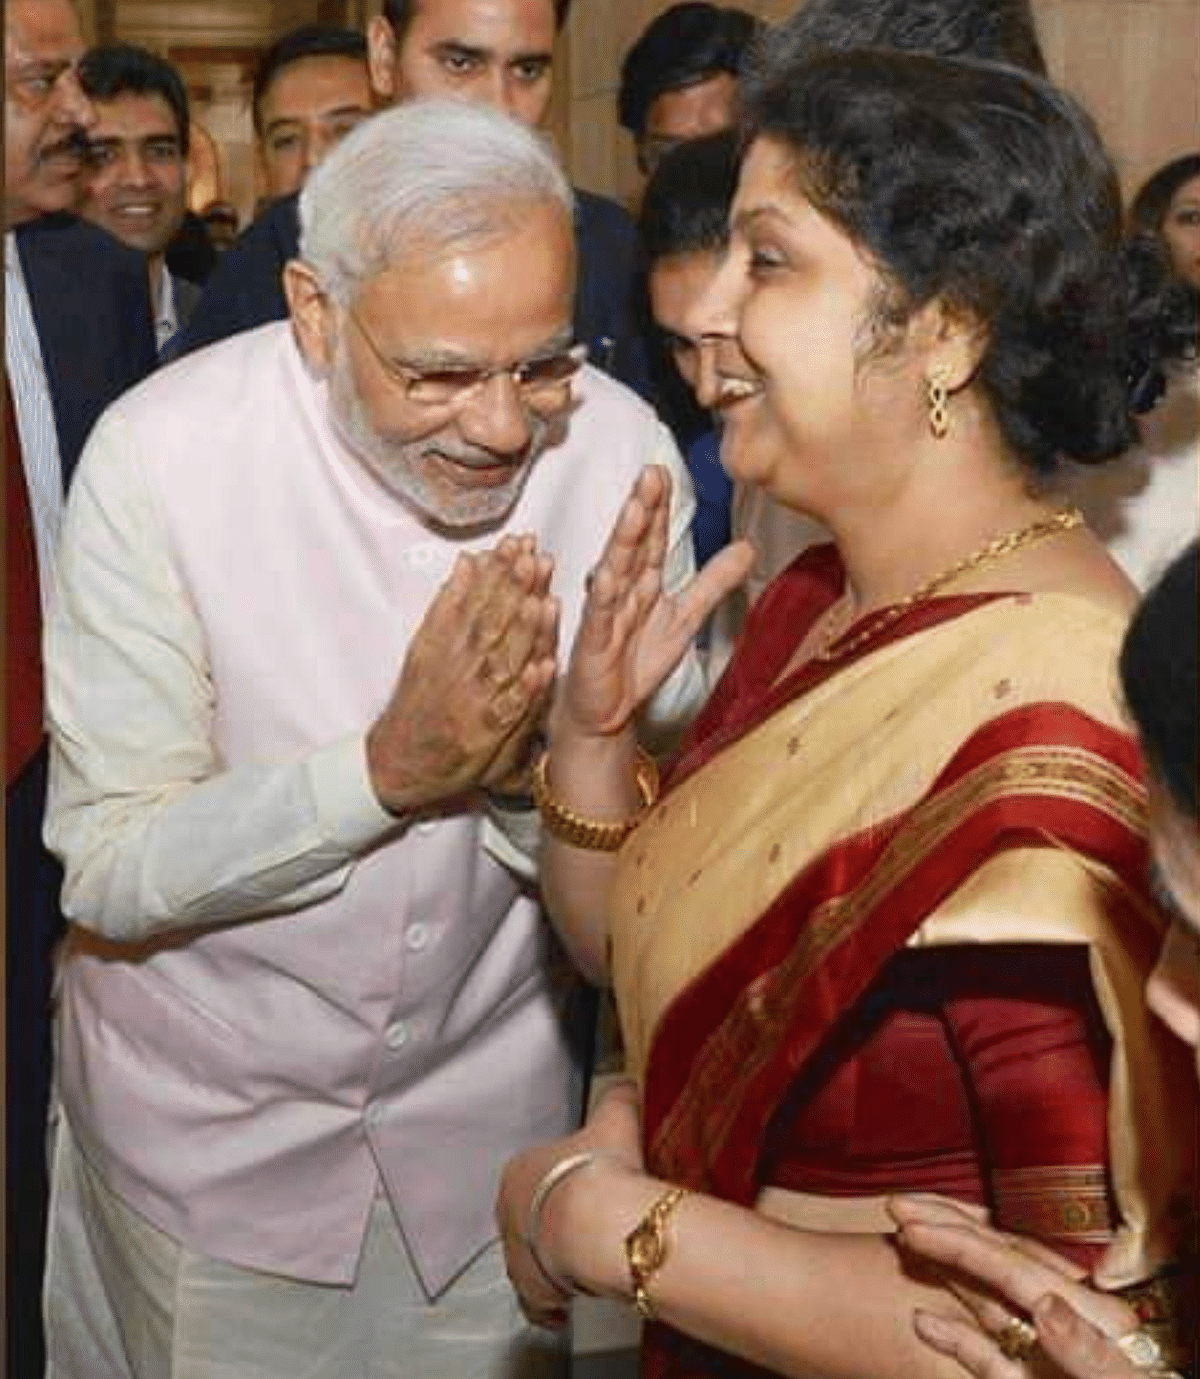 While one is Deepika Mondol, an office bearer in a Delhi-based NGO, the other one is ex-Tumkur mayor Geetha Rudresh.